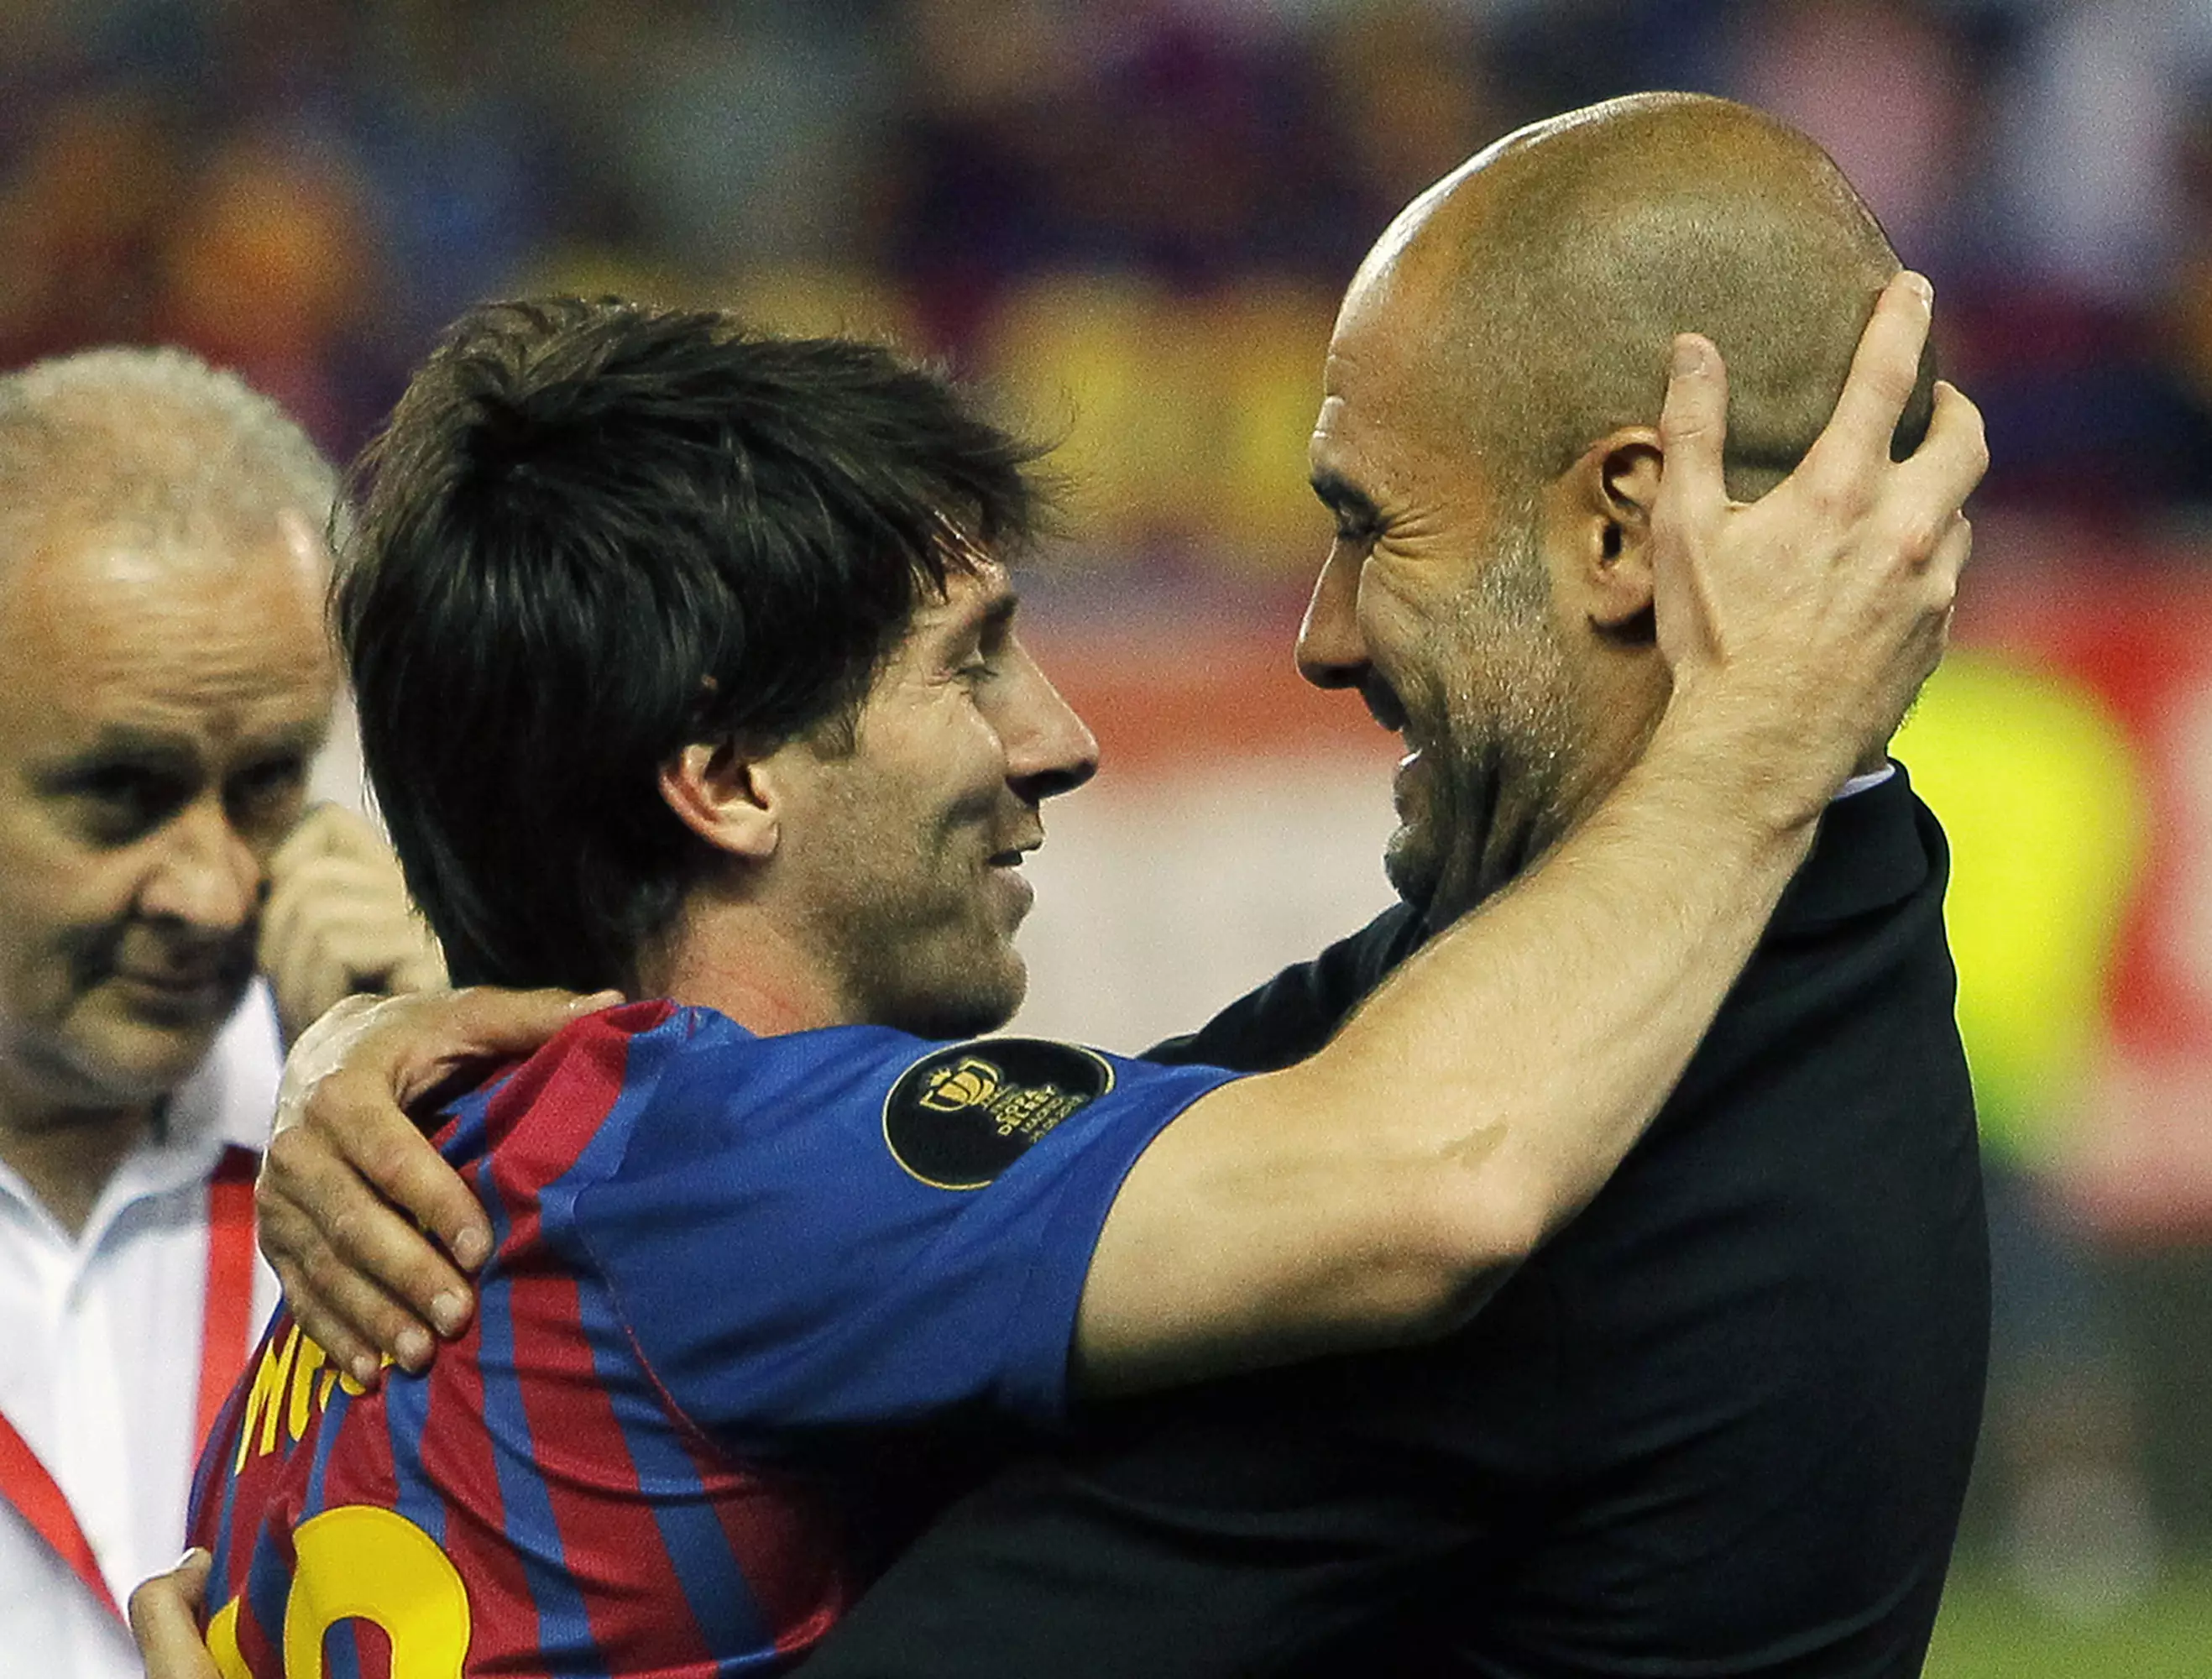 Manchester City's Pep Guardiola To Be Reunited With Lionel Messi?